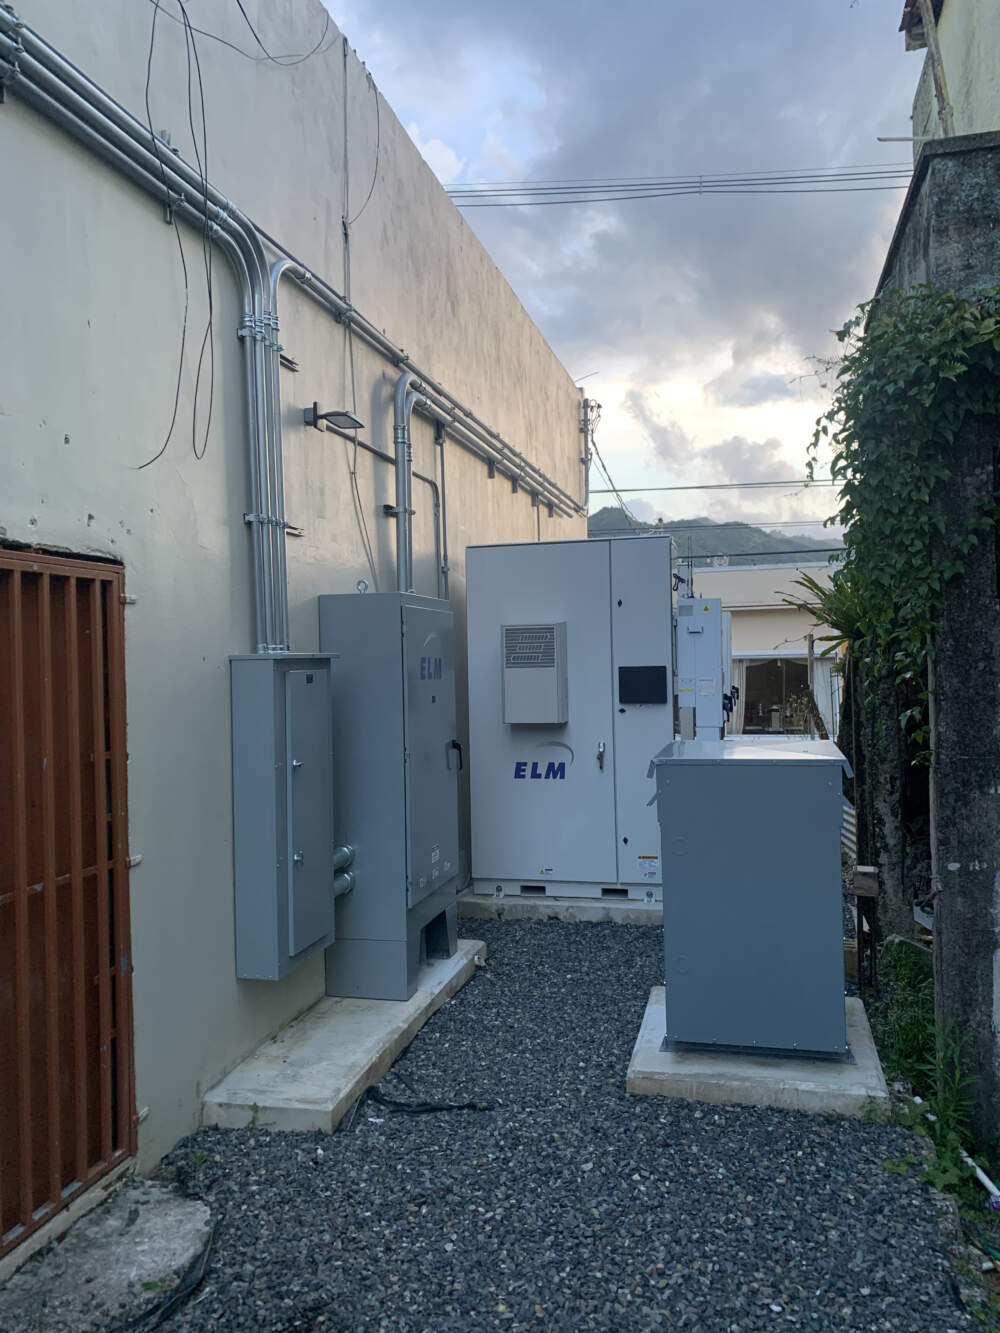 Battery arrays for the microgrid system in Adjuntas, Puerto Rico. (Chris Bentley/Here & Now)